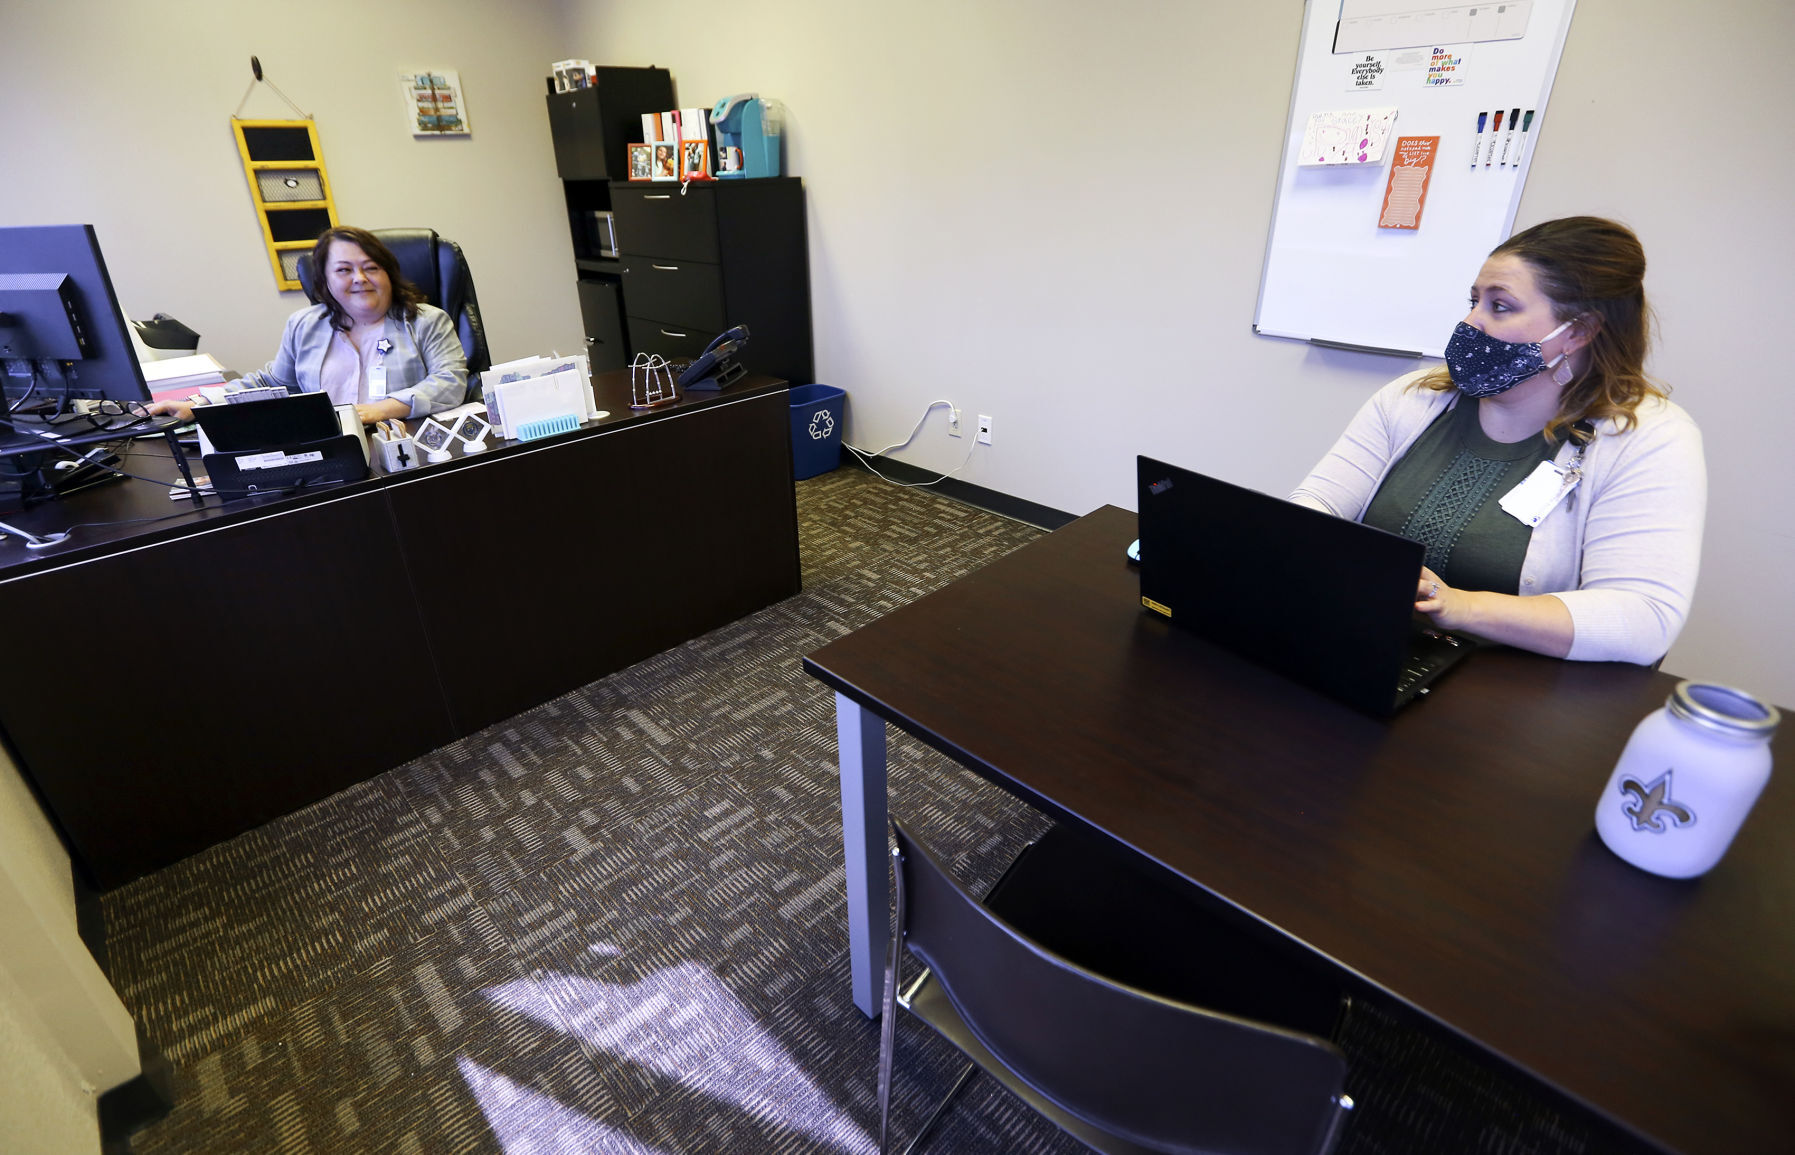 Stacey Killian (left) works with Brittany Hubanks at Visiting Nurse Association in Dubuque. PHOTO CREDIT: Nicki Kohl/Telegraph Herald